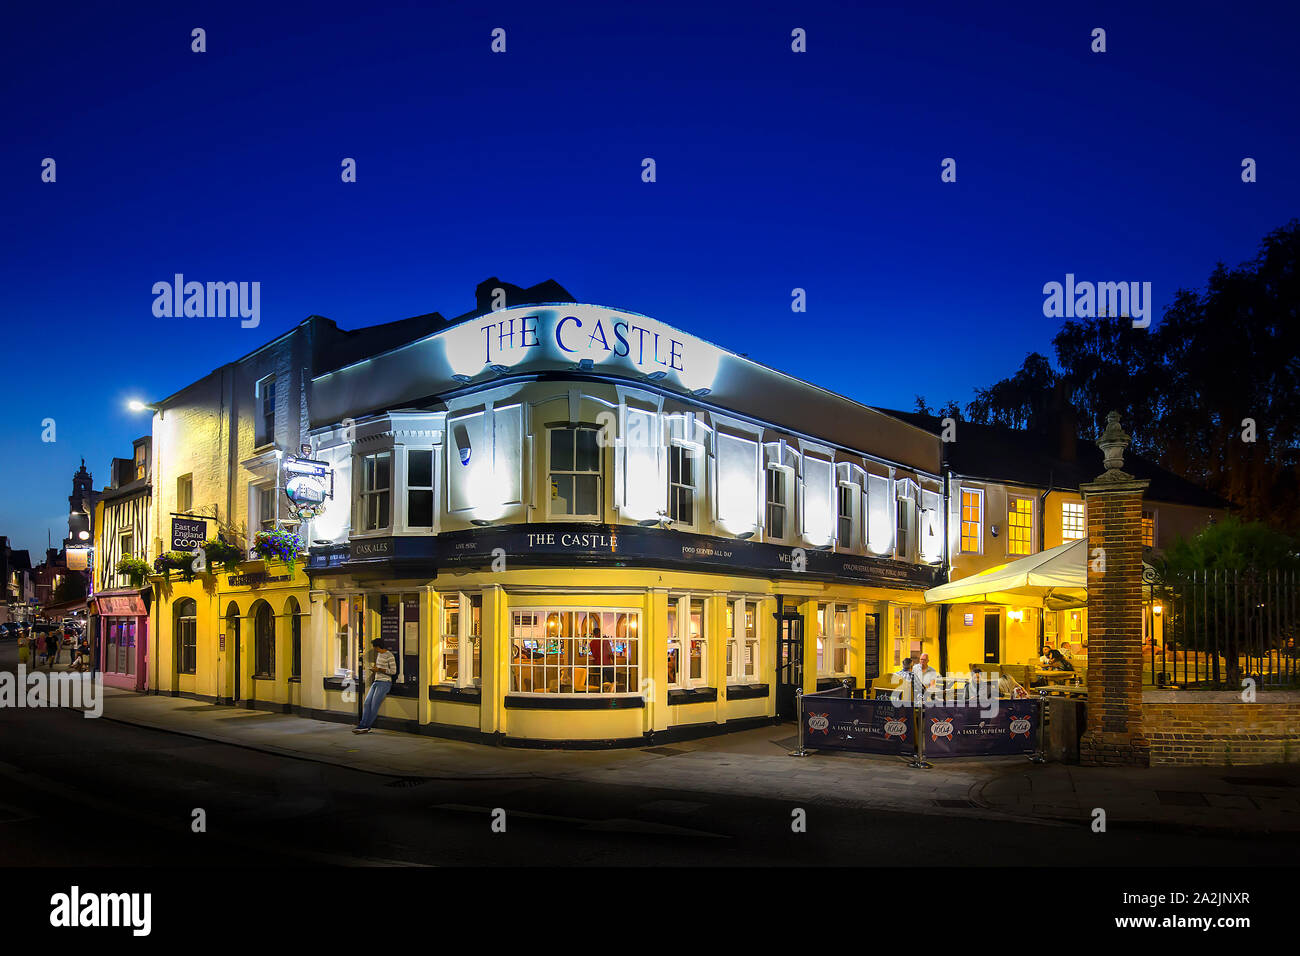 A historic Essex town, Britain's first city and former capital of Roman Britain. The Castle Pub at night Stock Photo